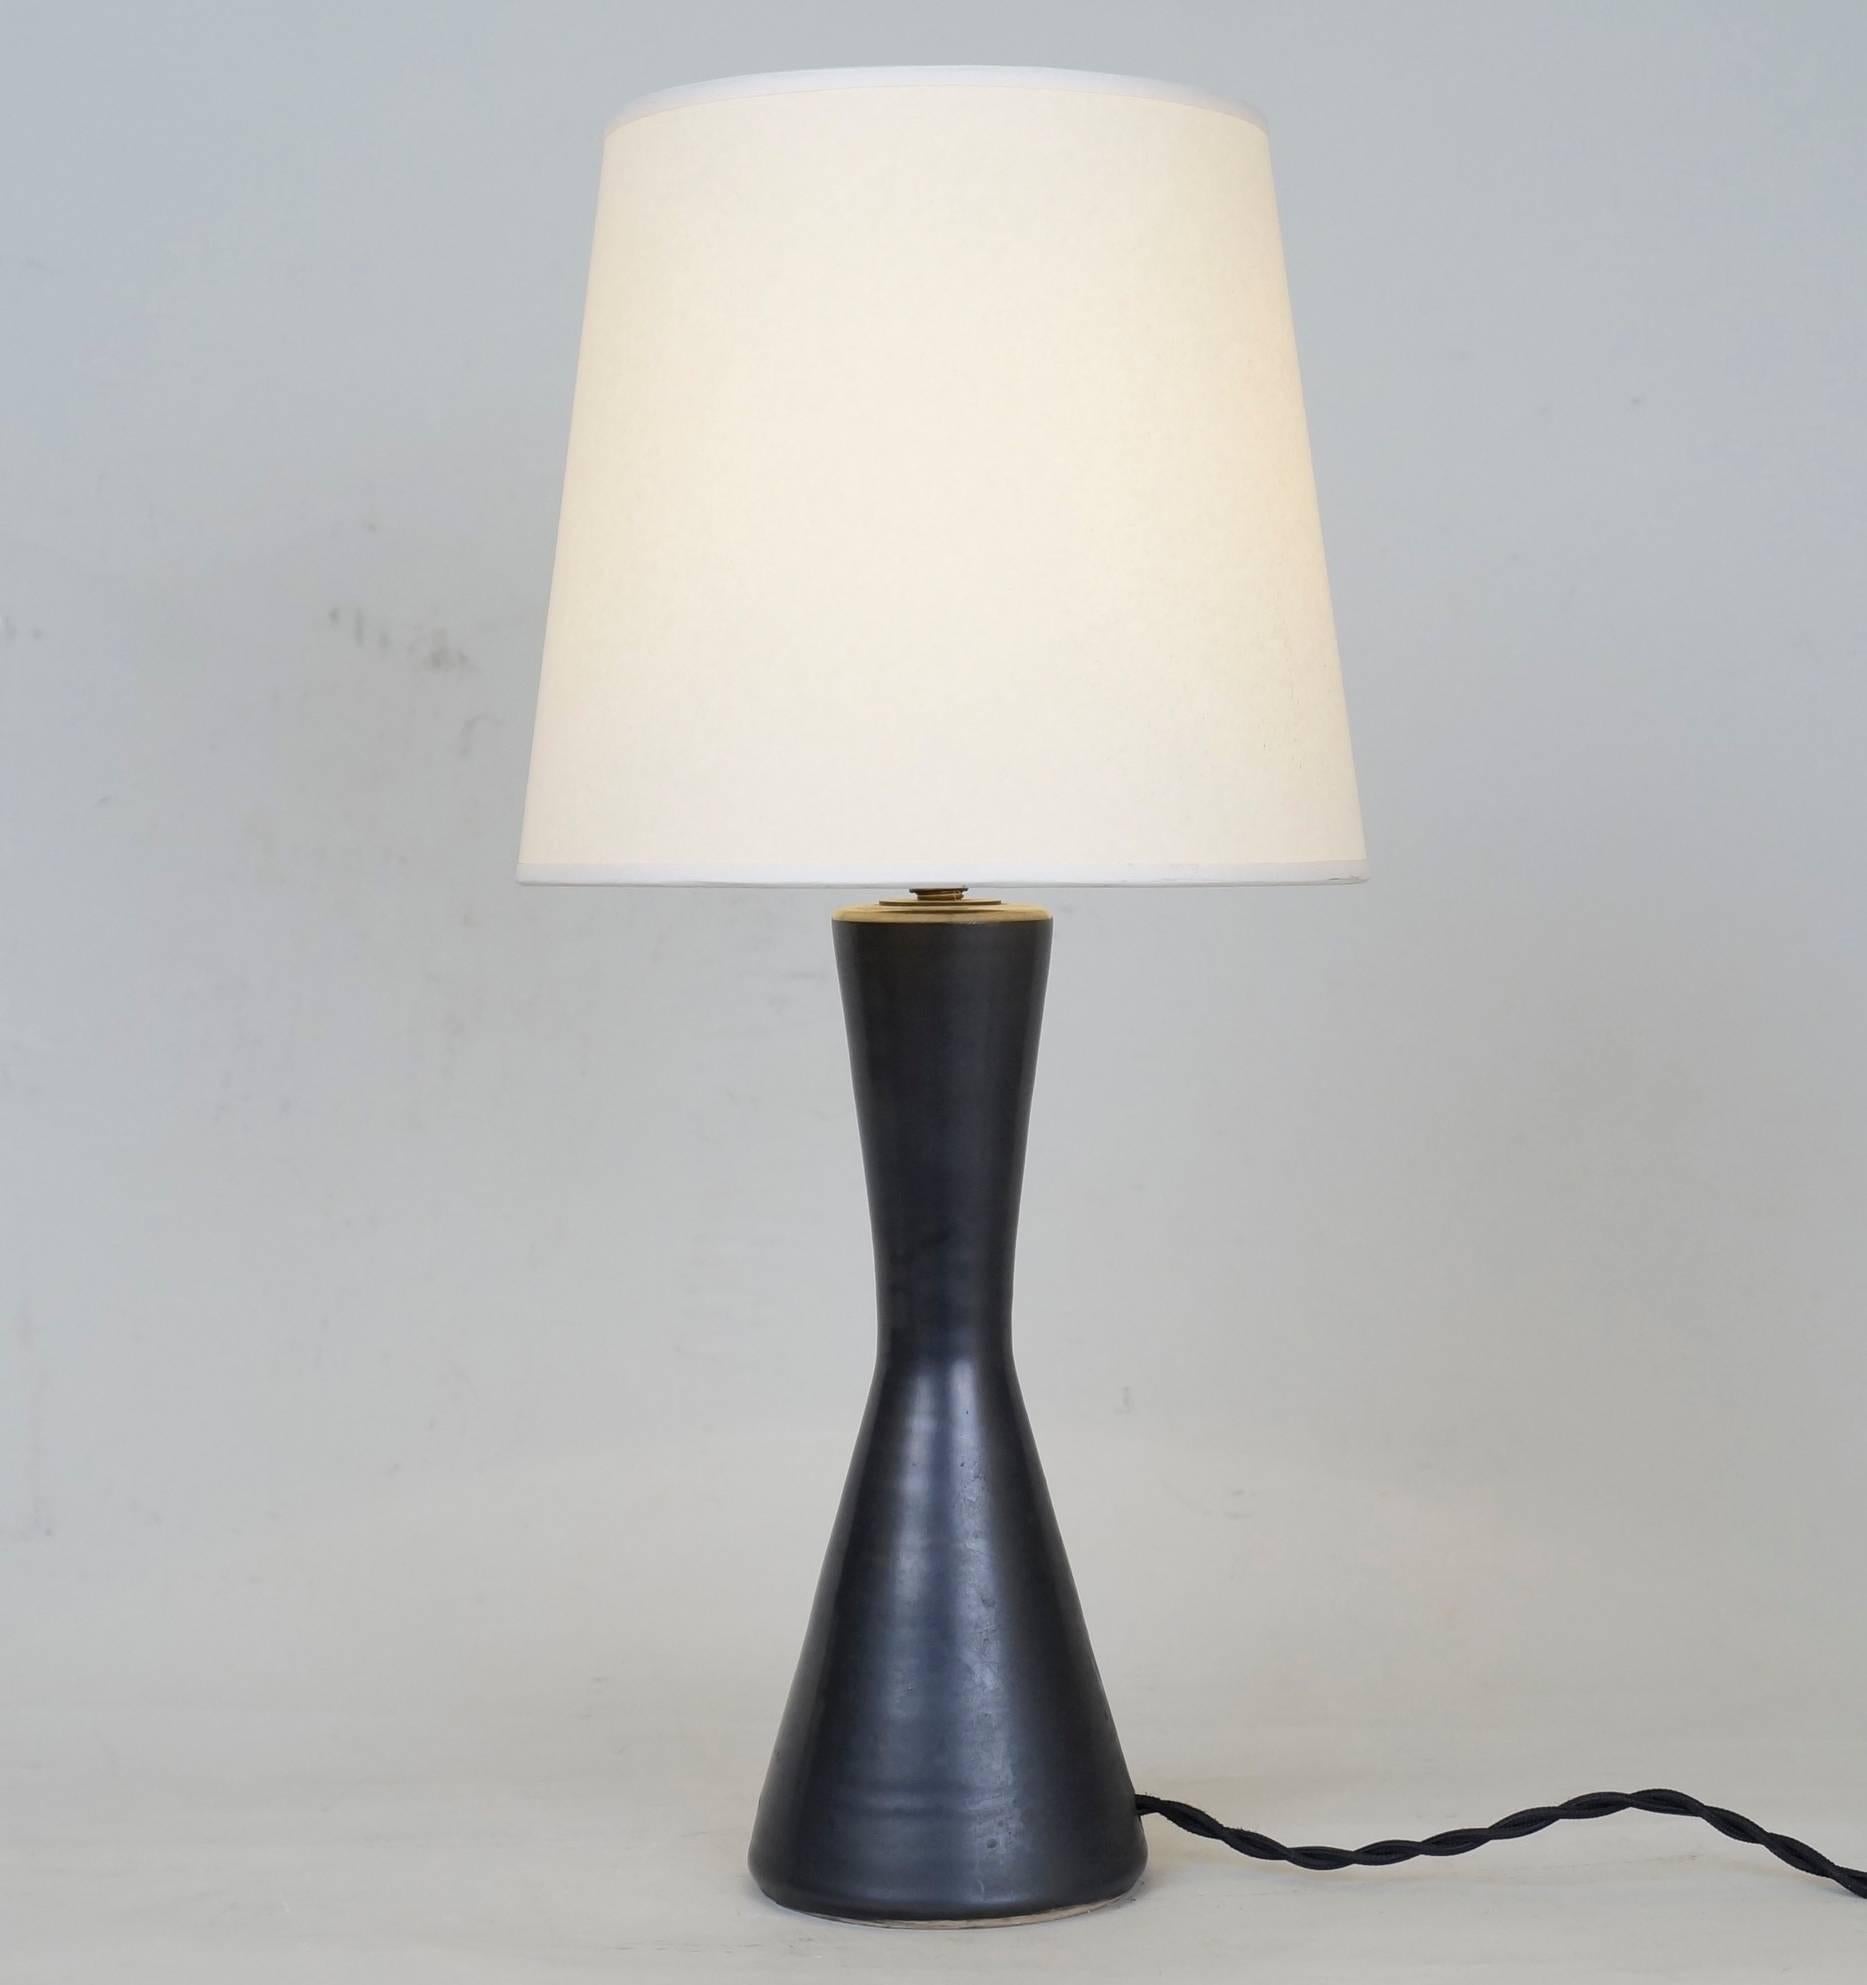 Black satin ceramic table lamp by Pol Chambost signed on the back.
Model 1008.
Custom-made fabric lampshade.
Rewired with twisted silk cord.
US standard plug on request.
Measures: Ceramic body height: 21 cm - 8.3 in.
Height with lampshade: 38